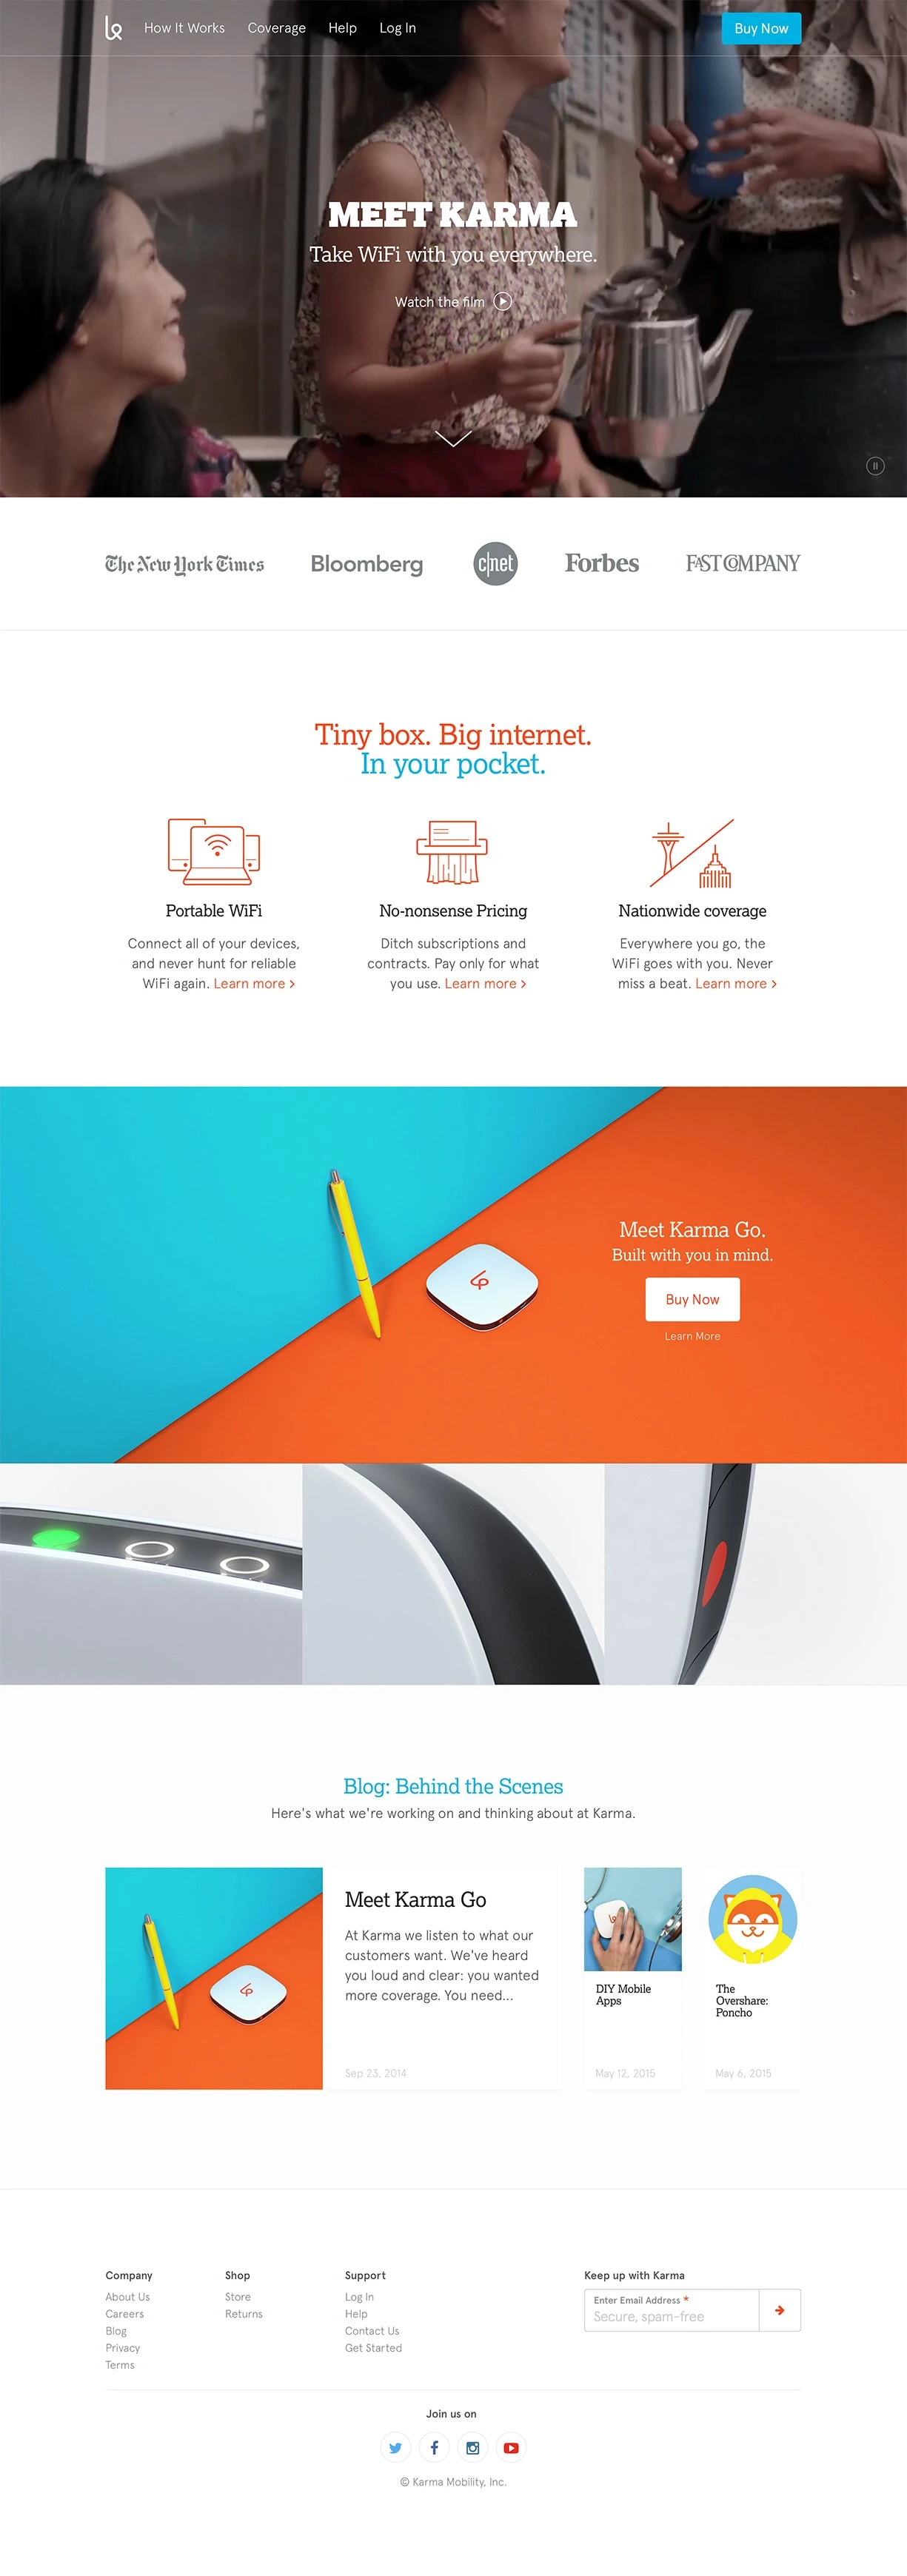 Karma Landing Page Example: Karma Go lets you take WiFi everywhere. Pay-as-you-go for data that never expires. No contracts or monthly fees. With nationwide coverage on LTE, stay connected to the internet with all of your devices, seamlessly.